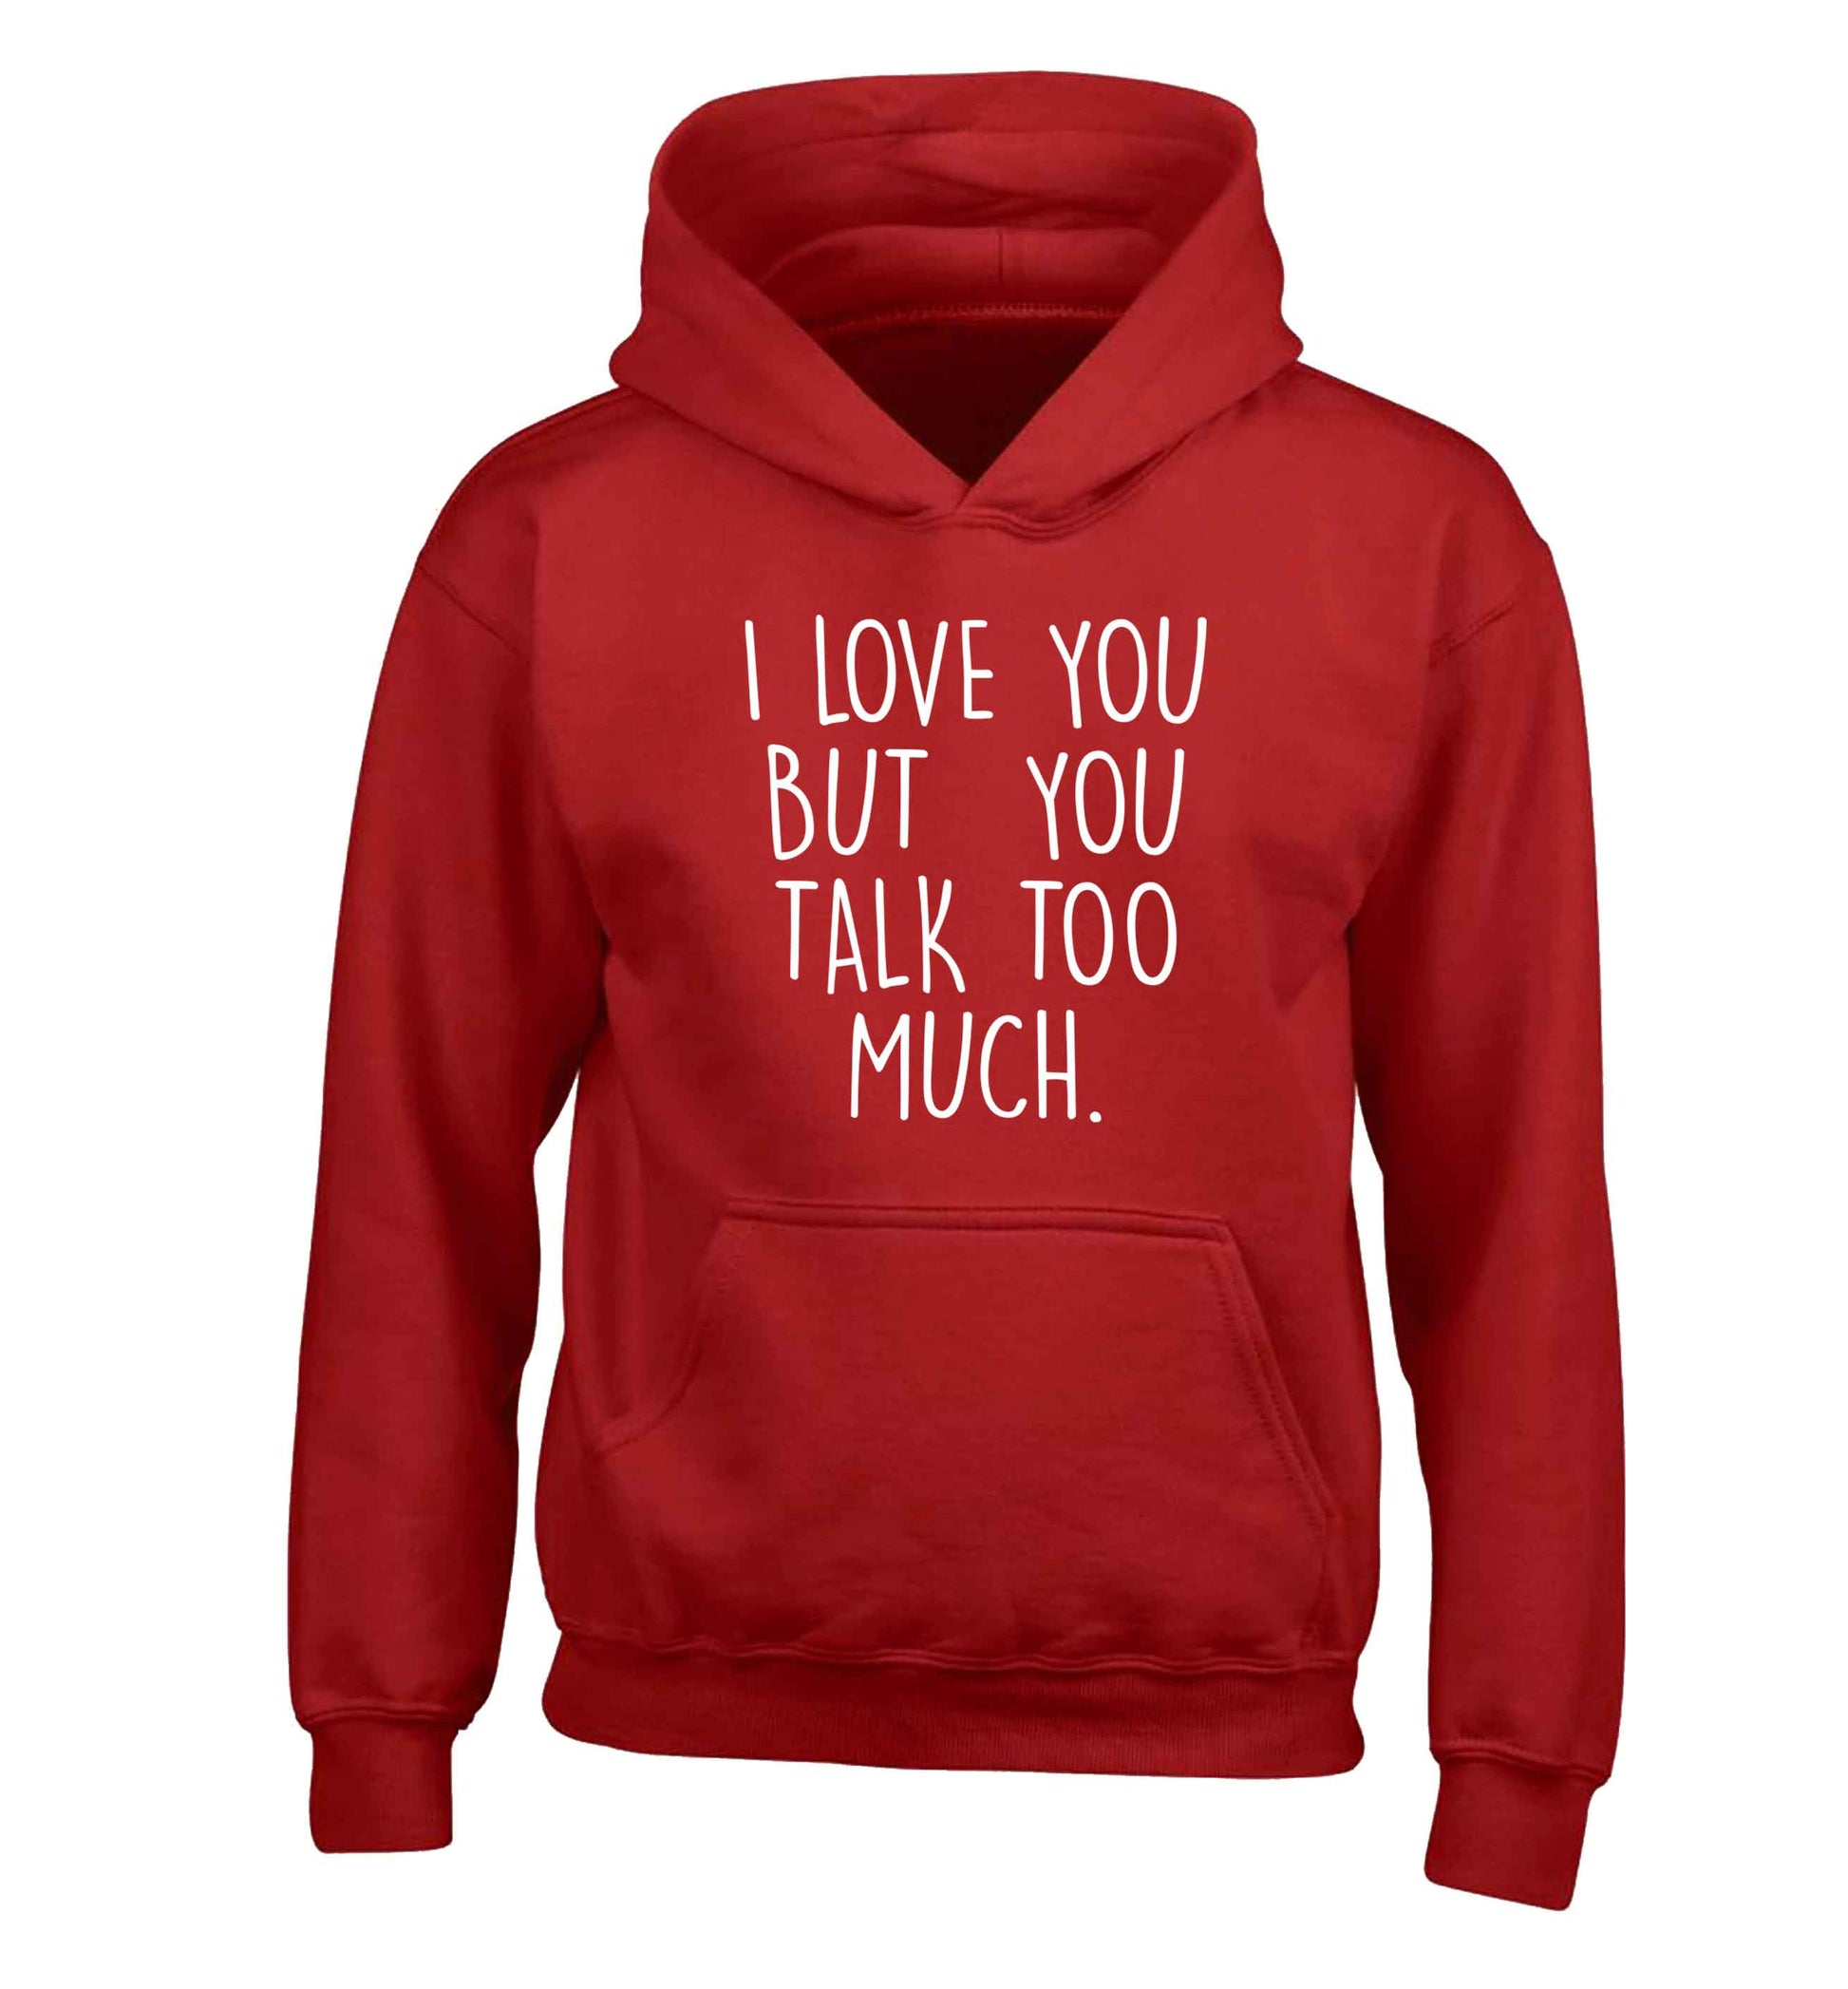 I love you but you talk too much children's red hoodie 12-13 Years